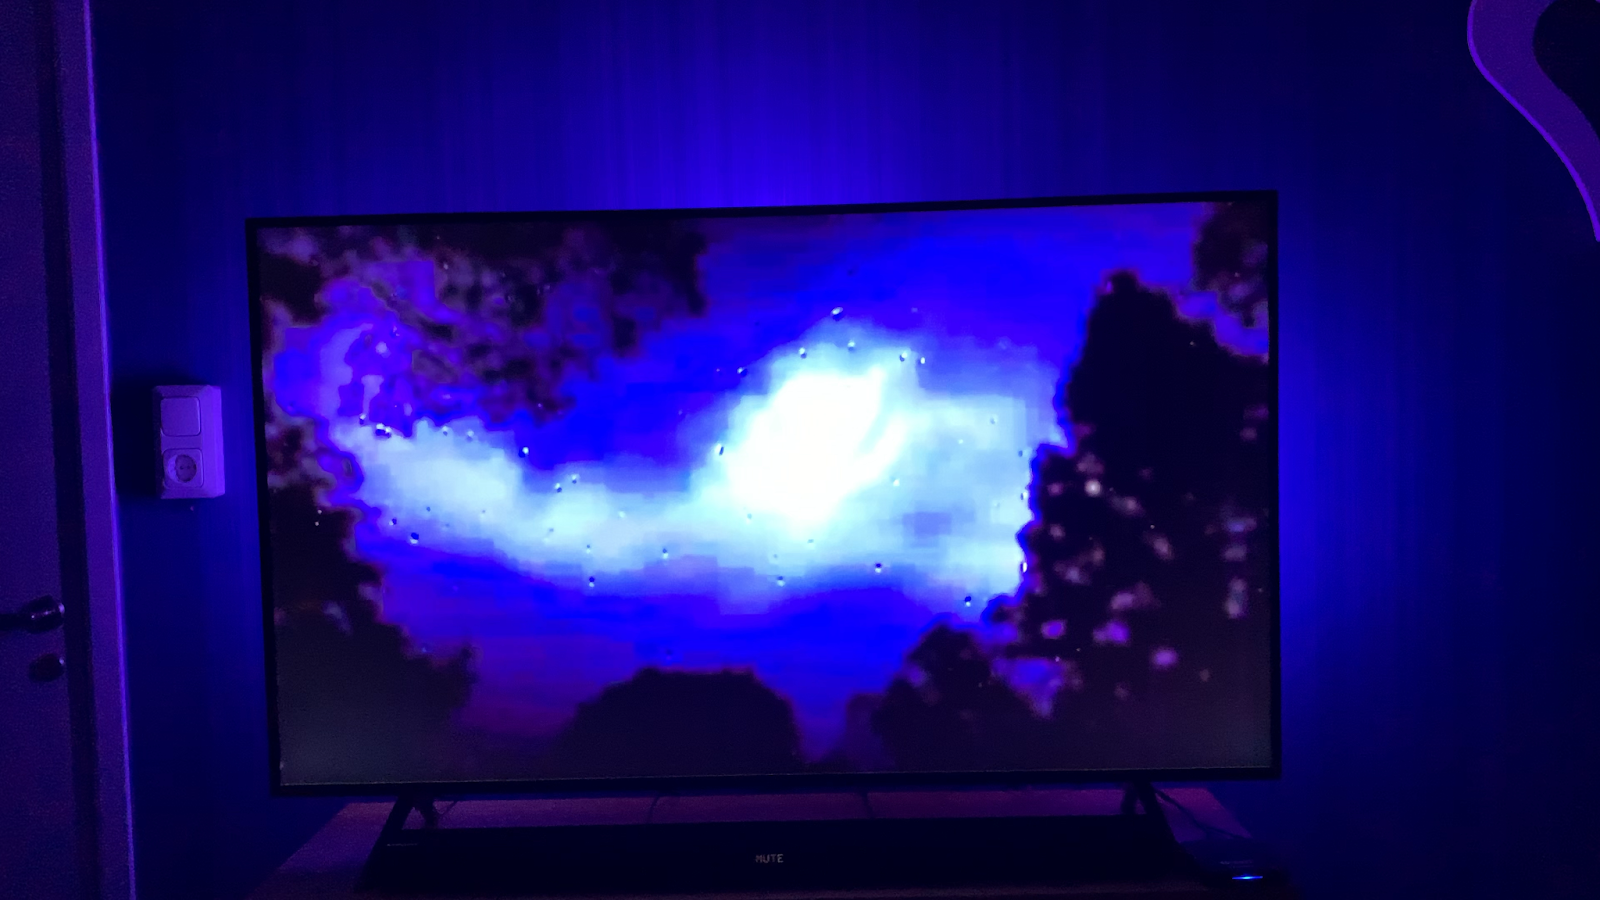 This is how to sync your Philips Hue lamps with any TV without the Philips Hue Sync Box